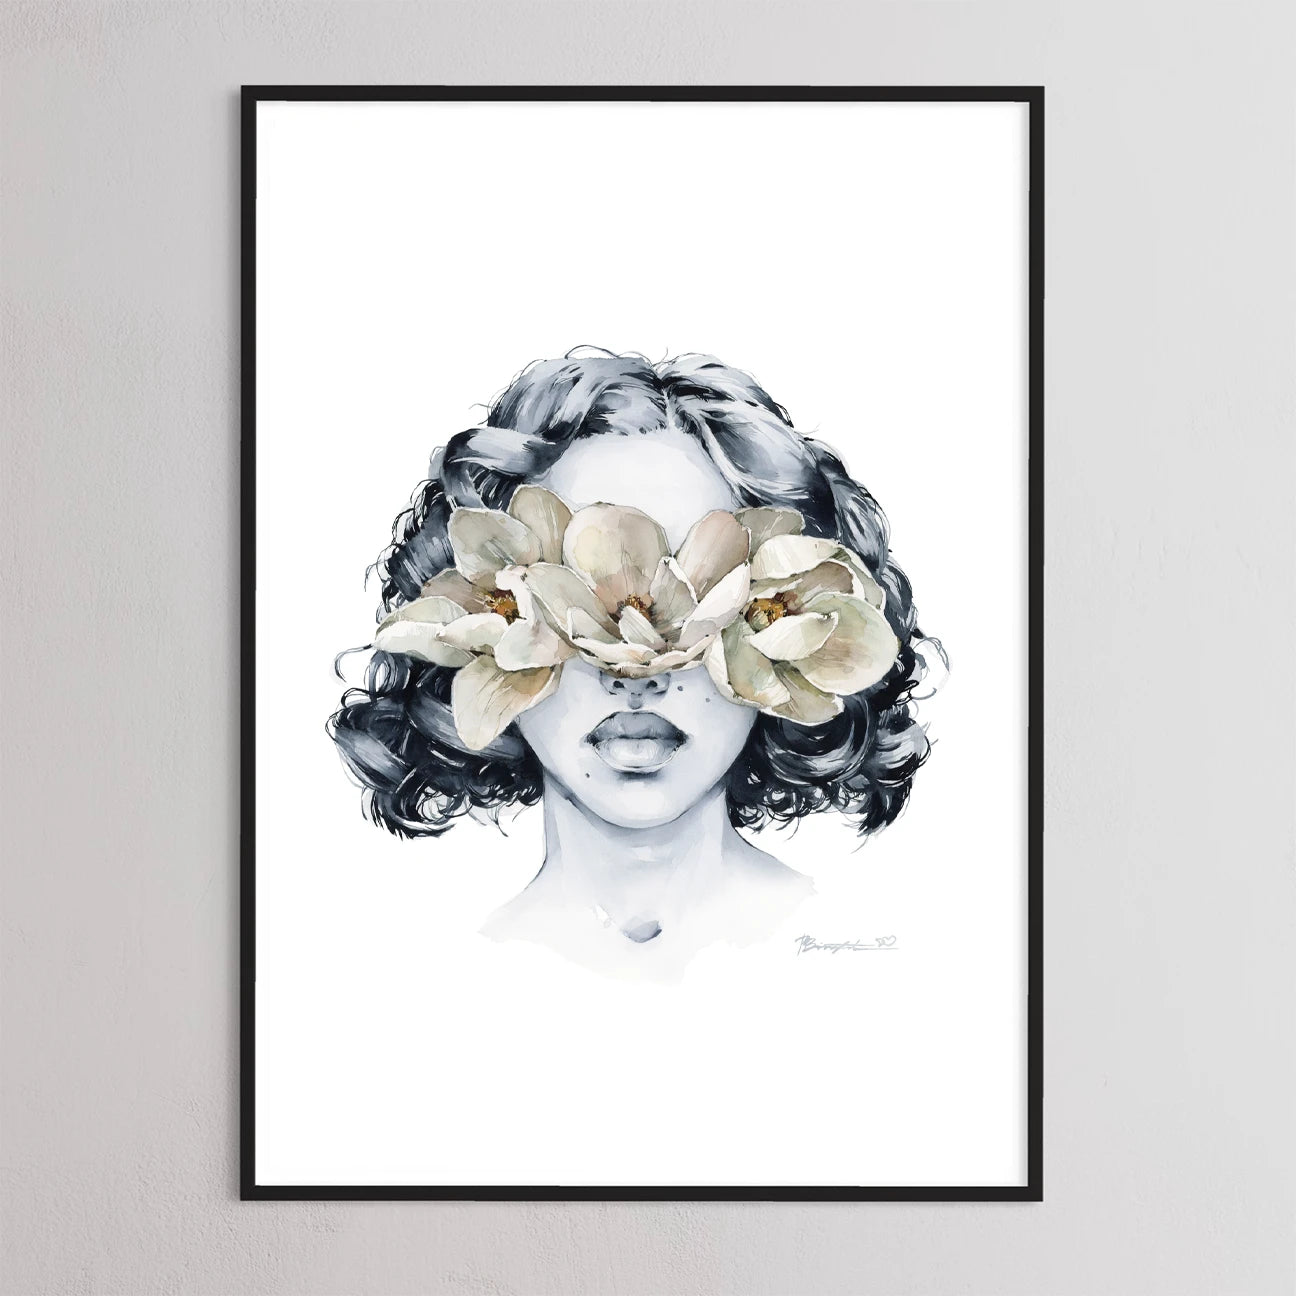 White magnolia blindfolded print by Polina Bright